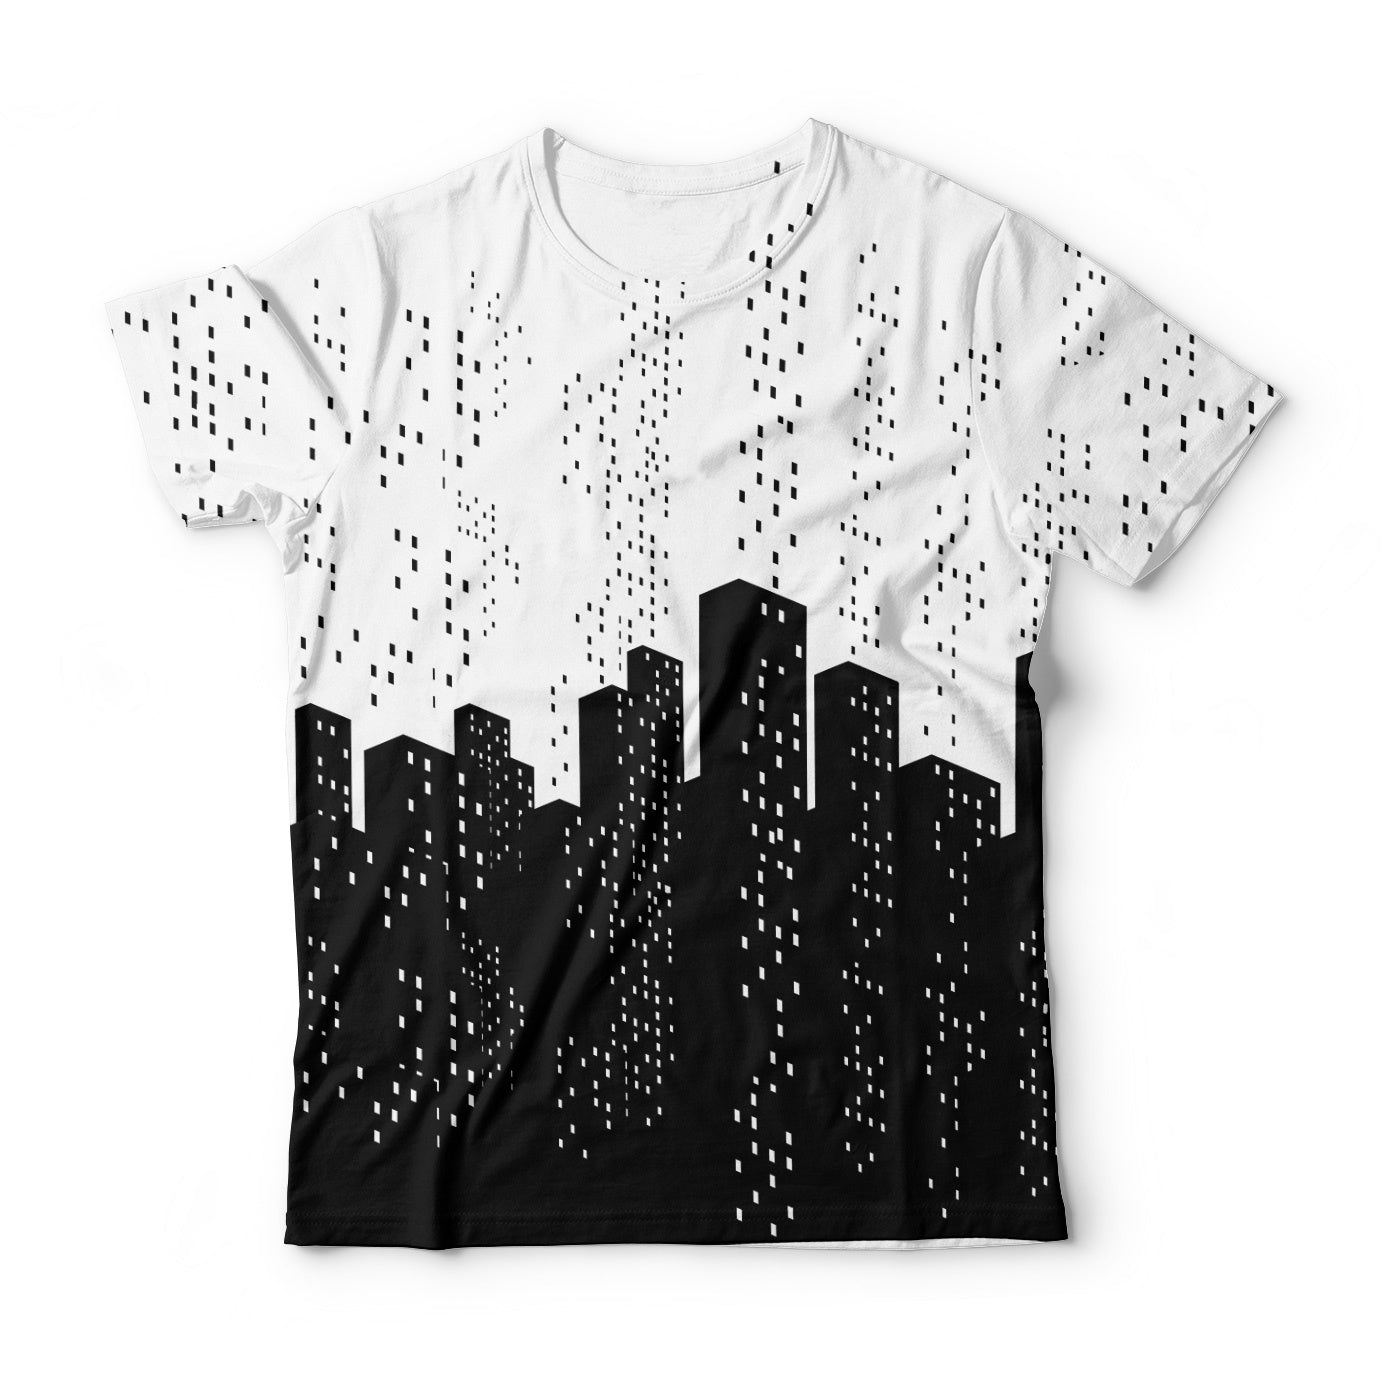 Future Structure T-Shirt